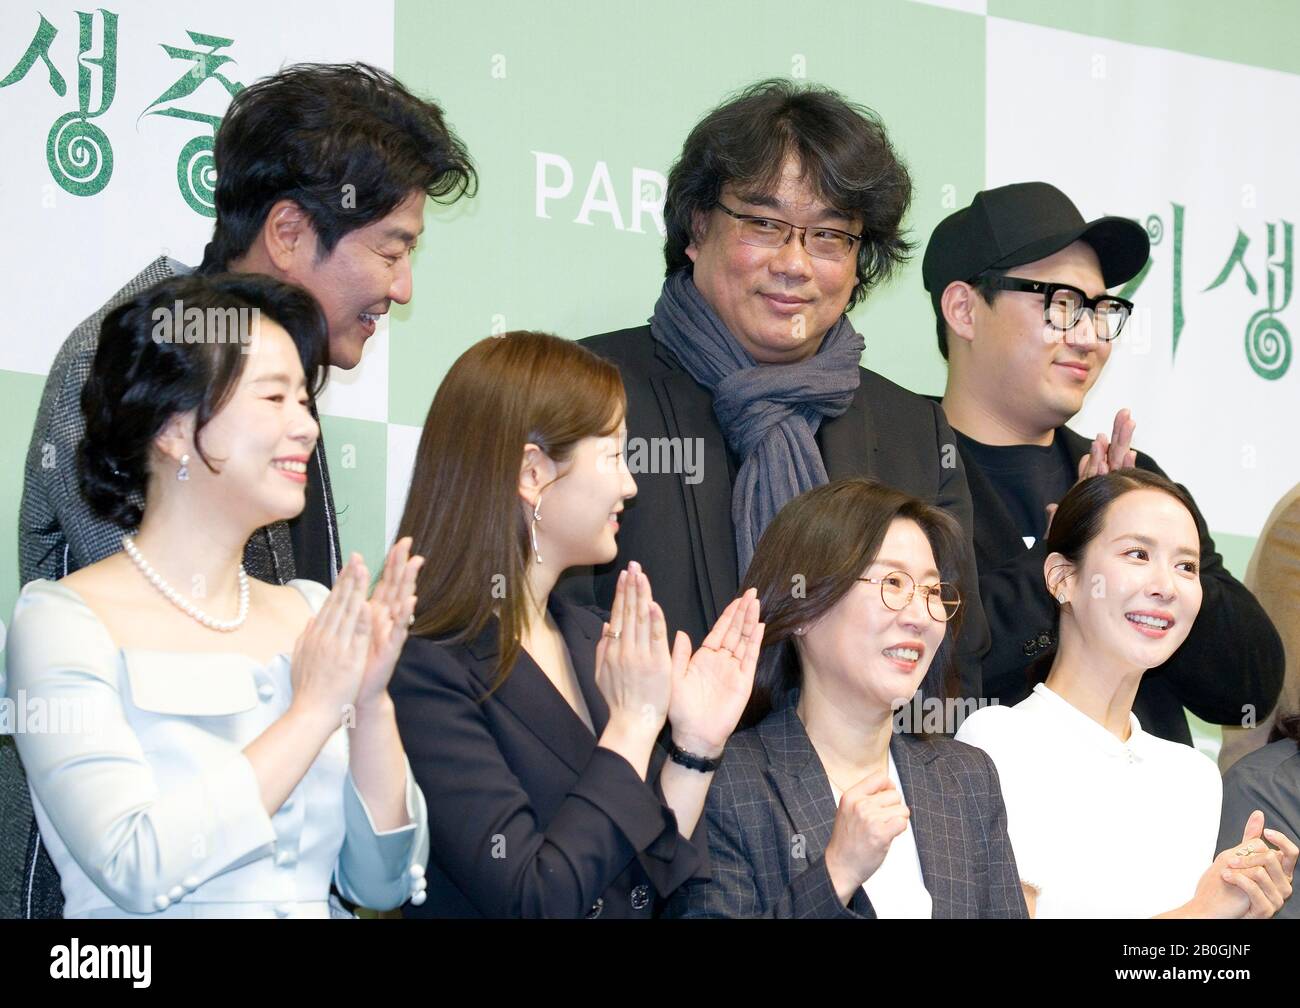 Song Kang-Ho, Bong Joon-Ho, Han Jin-Won, Jang Hye-Jin, Park So-Dam, Kwak Sin-Ae and Cho Yeo-Jeong, Feb 19, 2020 : (L-R, 2nd row) Actor Song Kang-Ho, director Bong Joon-Ho, screenwriter Han Jin-Won, (L-R, front row) cast members Jang Hye-Jin, Park So-Dam, film producer Kwak Sin-Ae and actress Cho Yeo-Jeong attend a press conference held for their Oscar-winning film 'Parasite' in Seoul, South Korea. The Korean black comedy thriller won four Oscar titles at the Academy Awards on Feb 9, 2020, becoming the first non-English language film to win the Oscars Best Picture in its 92-year history. (Photo Stock Photo